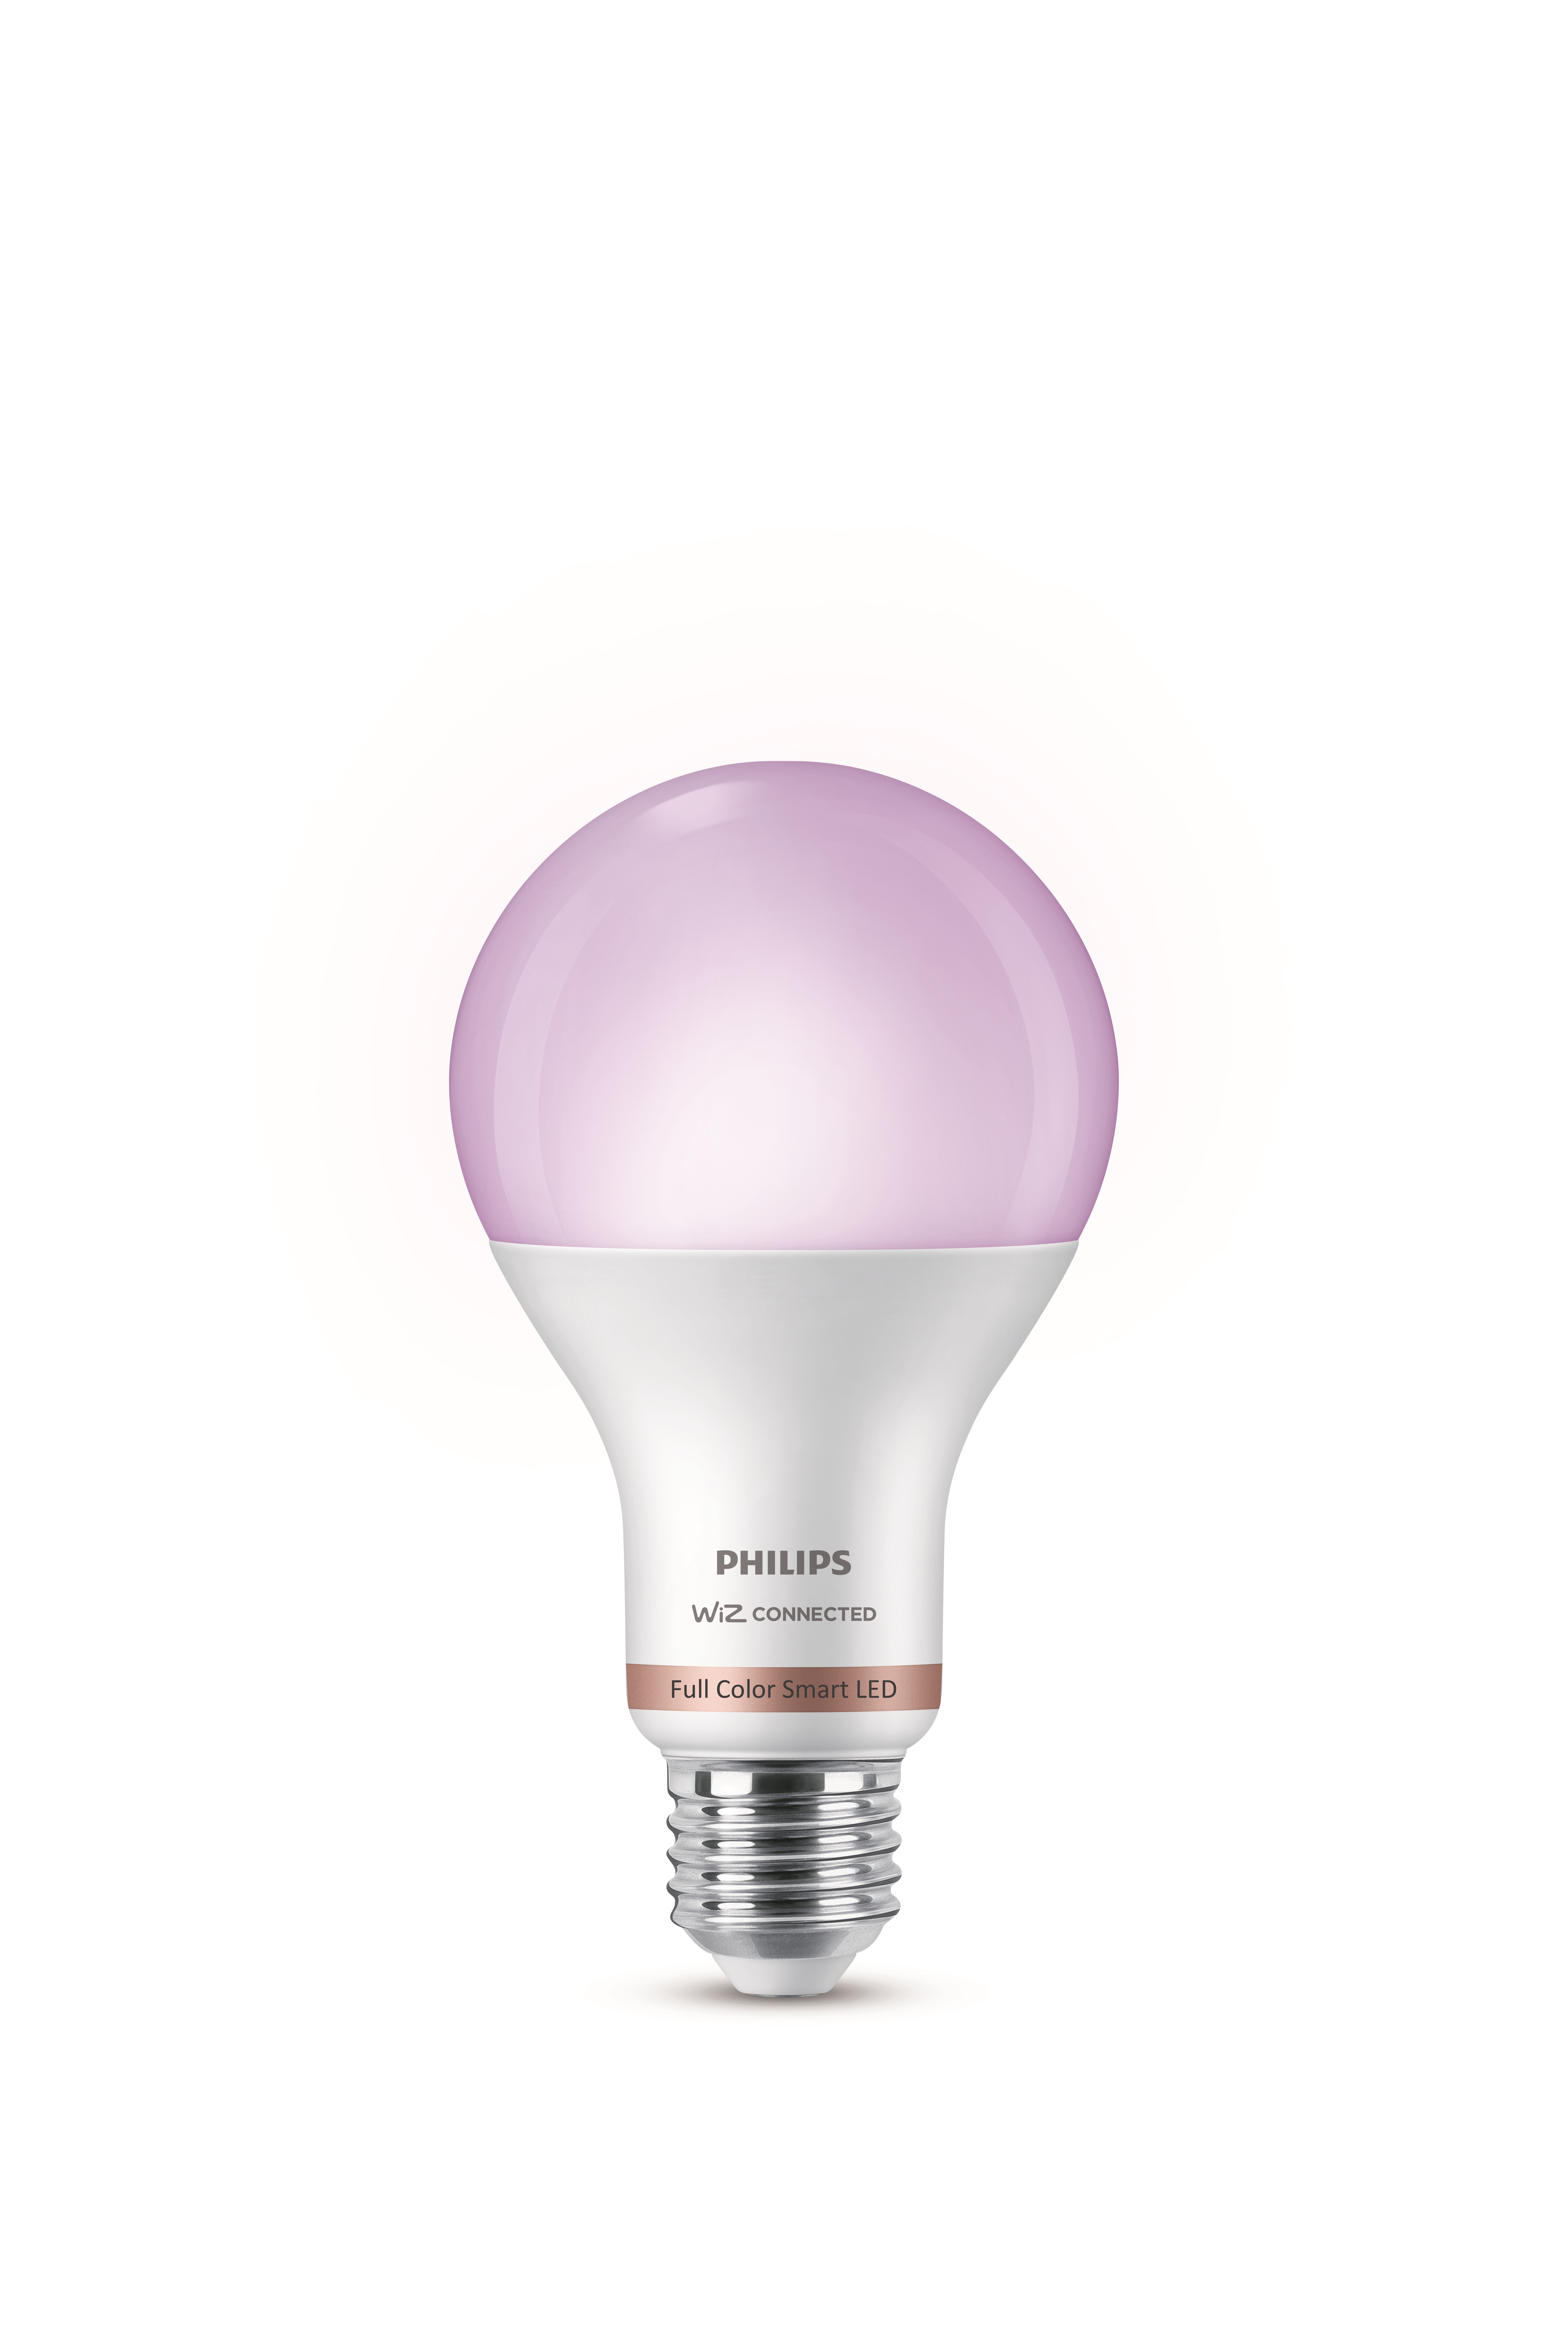 PHILIPS Smart LED E27, WiZ connected, 13 W, 1521 lm, Full color, dimmbar